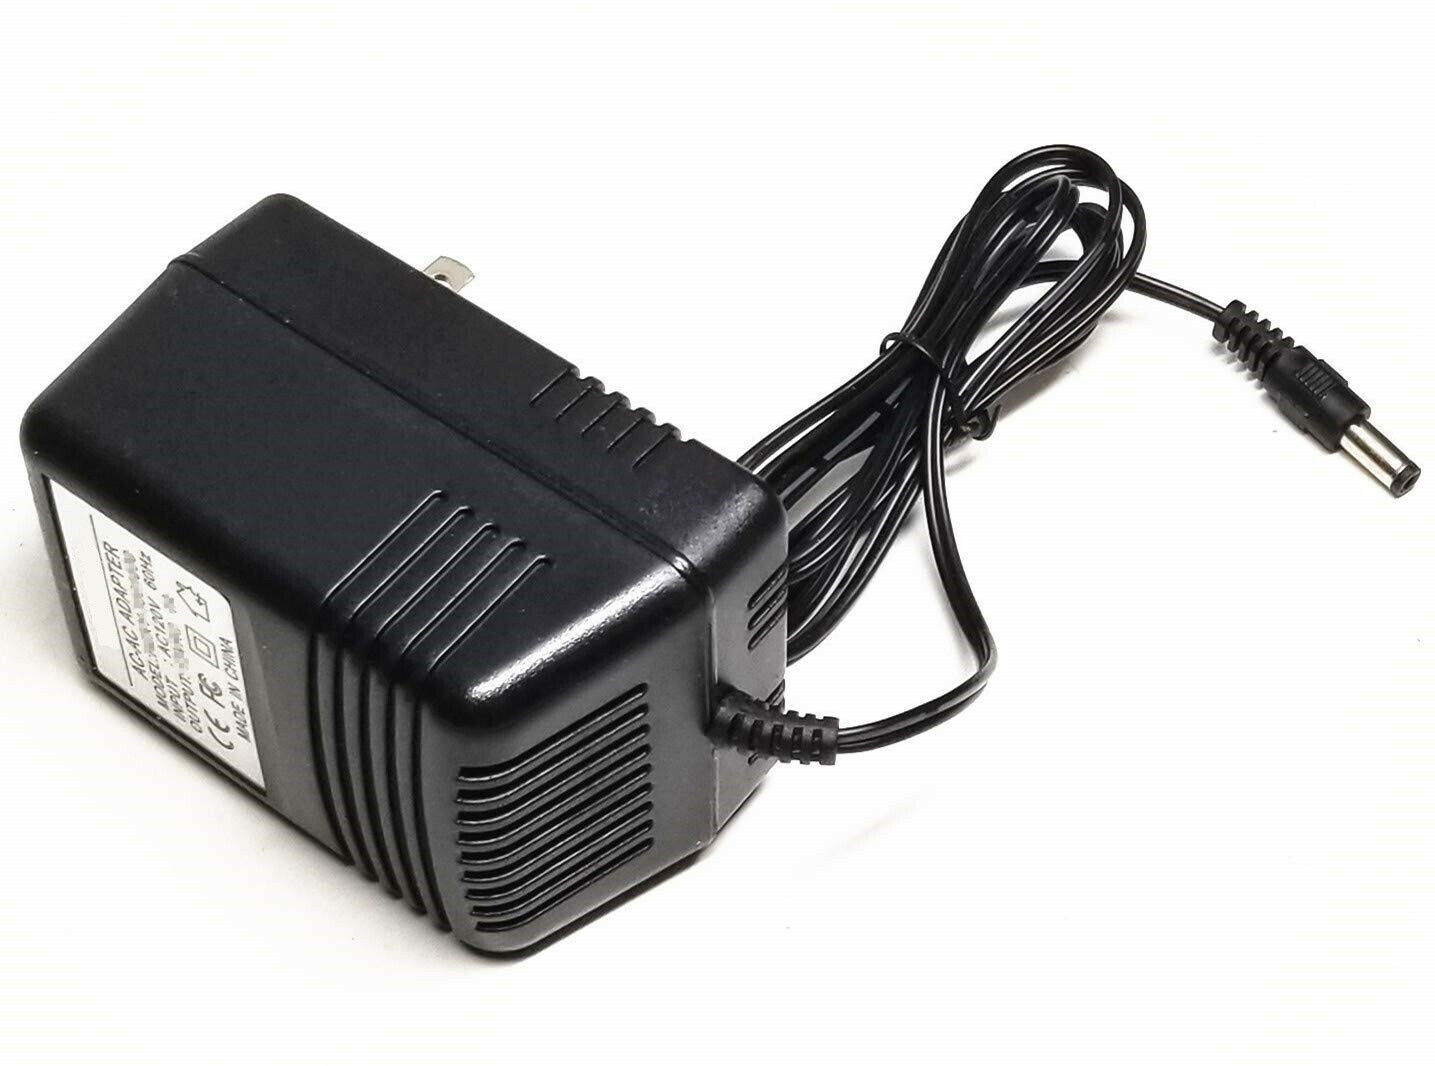 AC Adapter Power For Singing SML385BTW SML385BTBK Karaoke System DC 5.8V-6V Specifications: Type: AC to DC